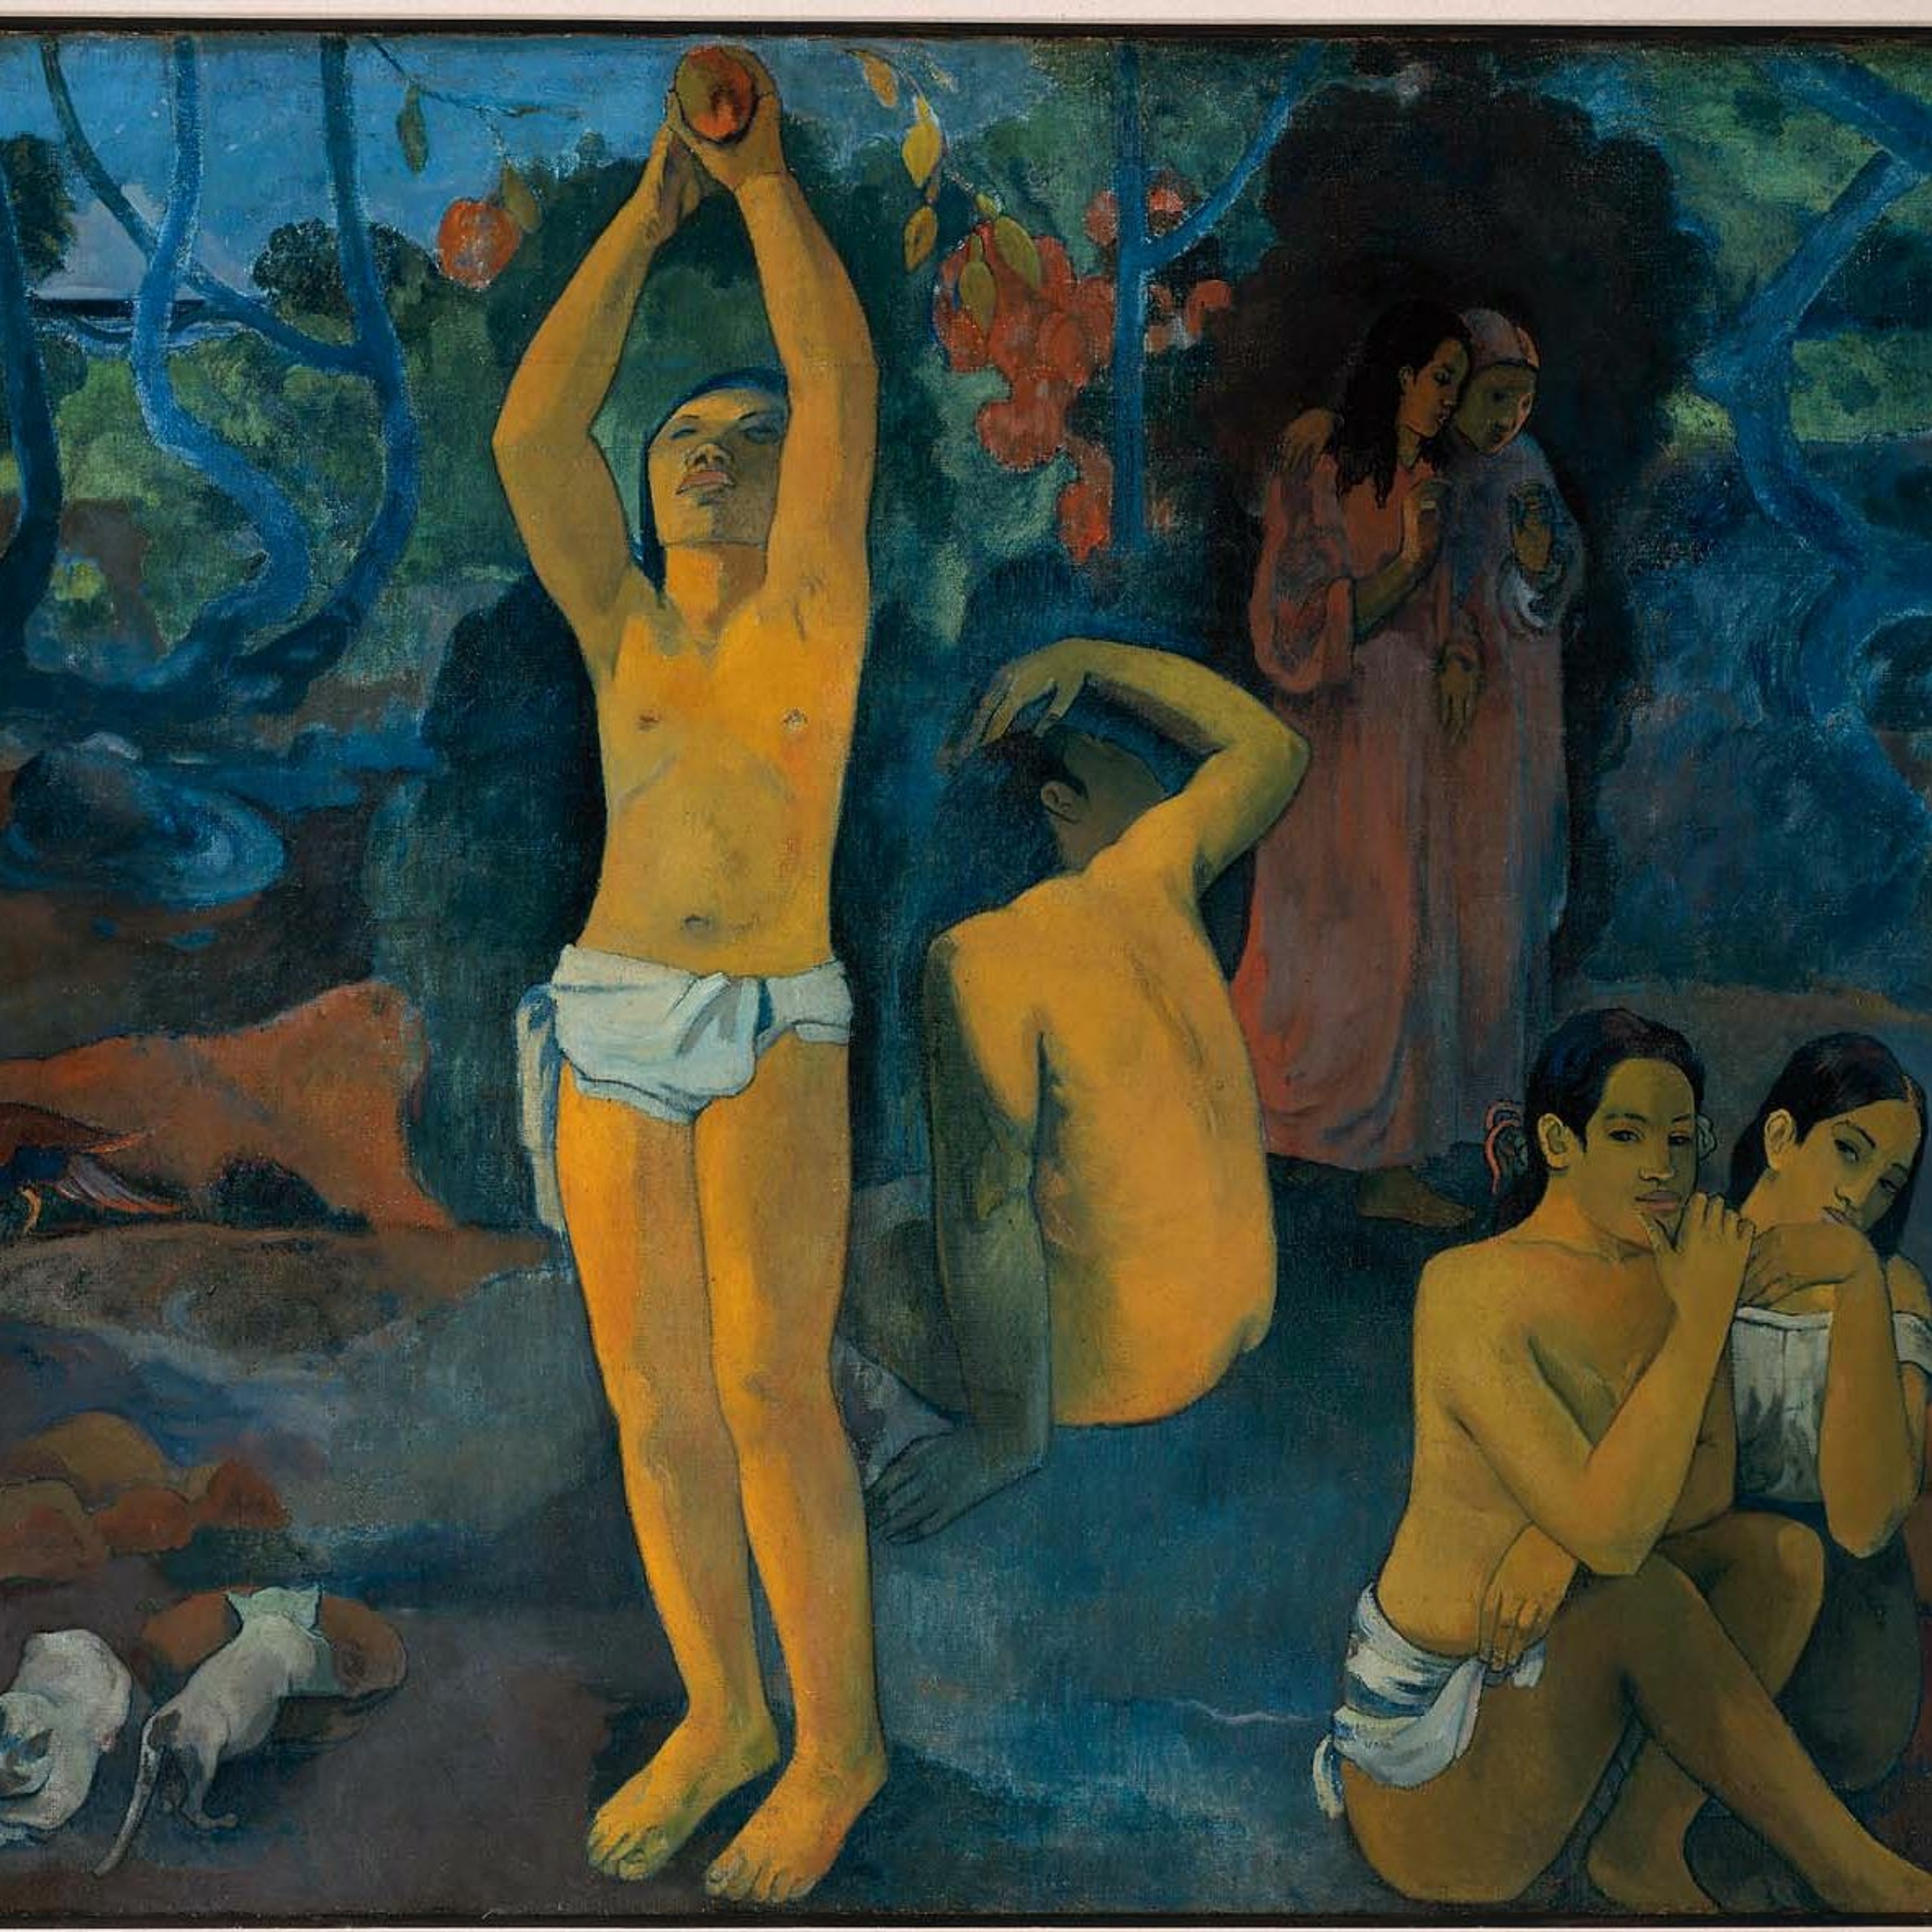 Ep. 14  - Paul Gauguin's "Where Do We Come From? What Are We? Where Are We Going?" (1897-98)